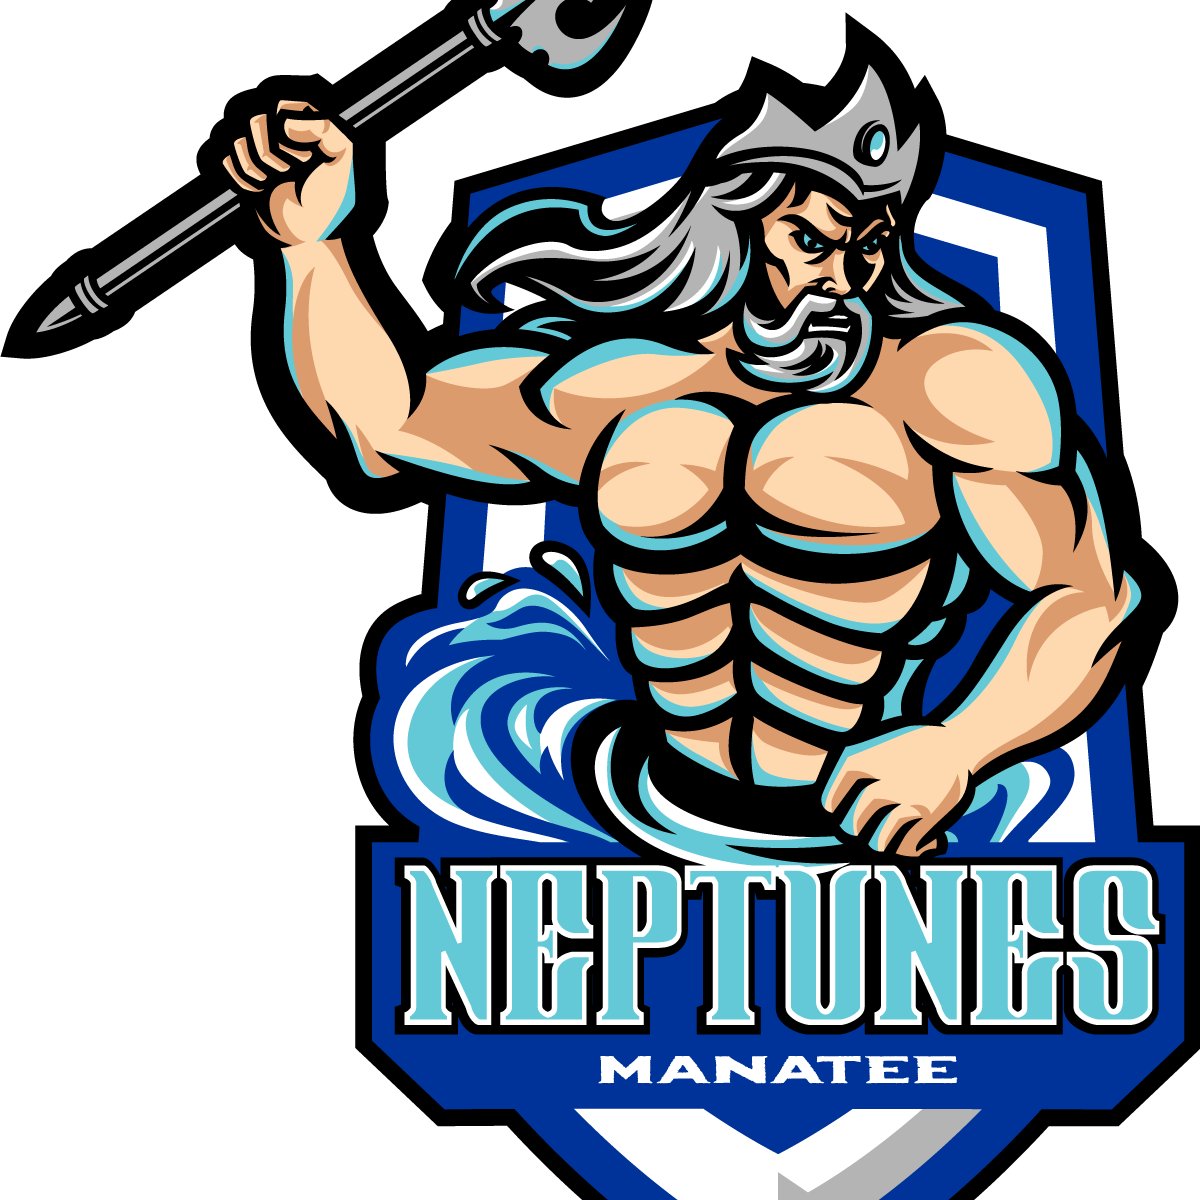 Official Twitter for the Manatee Neptunes Arena Football team. Home Arena: Robarts Arena Follow us for game updates, news, contests and other cool info!